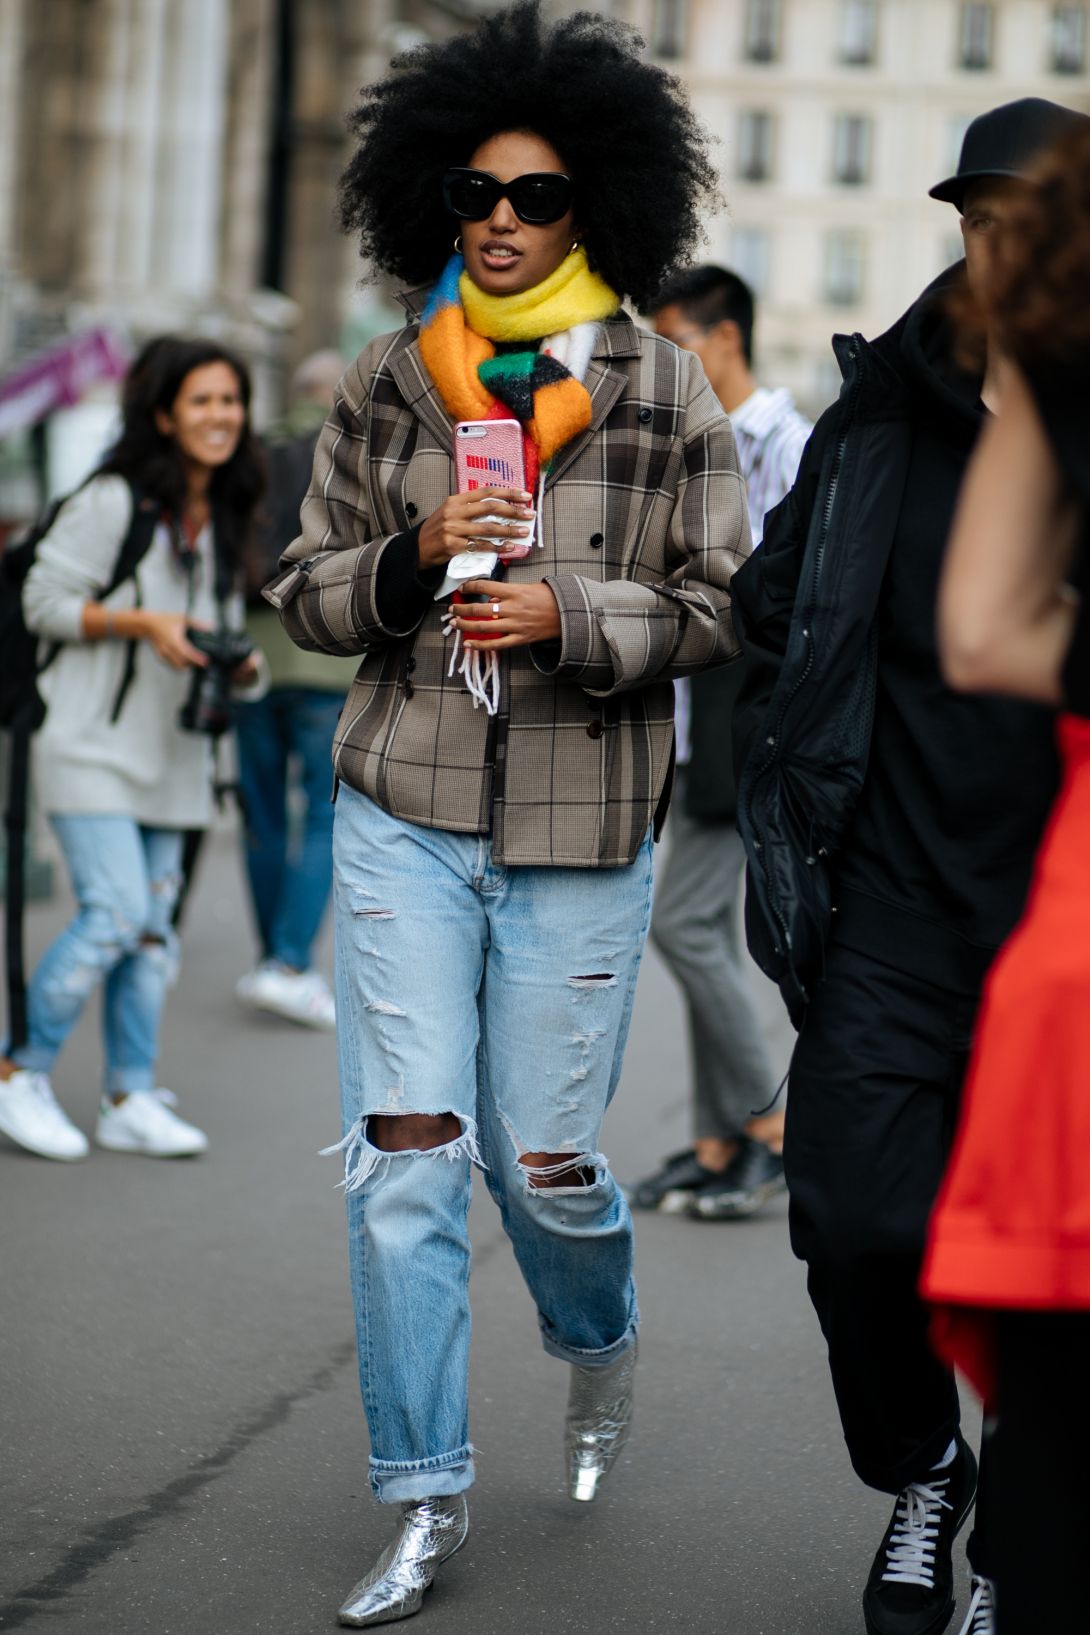 Denim Street Style From Paris Fashion Week SS18 – THE JEANS BLOG